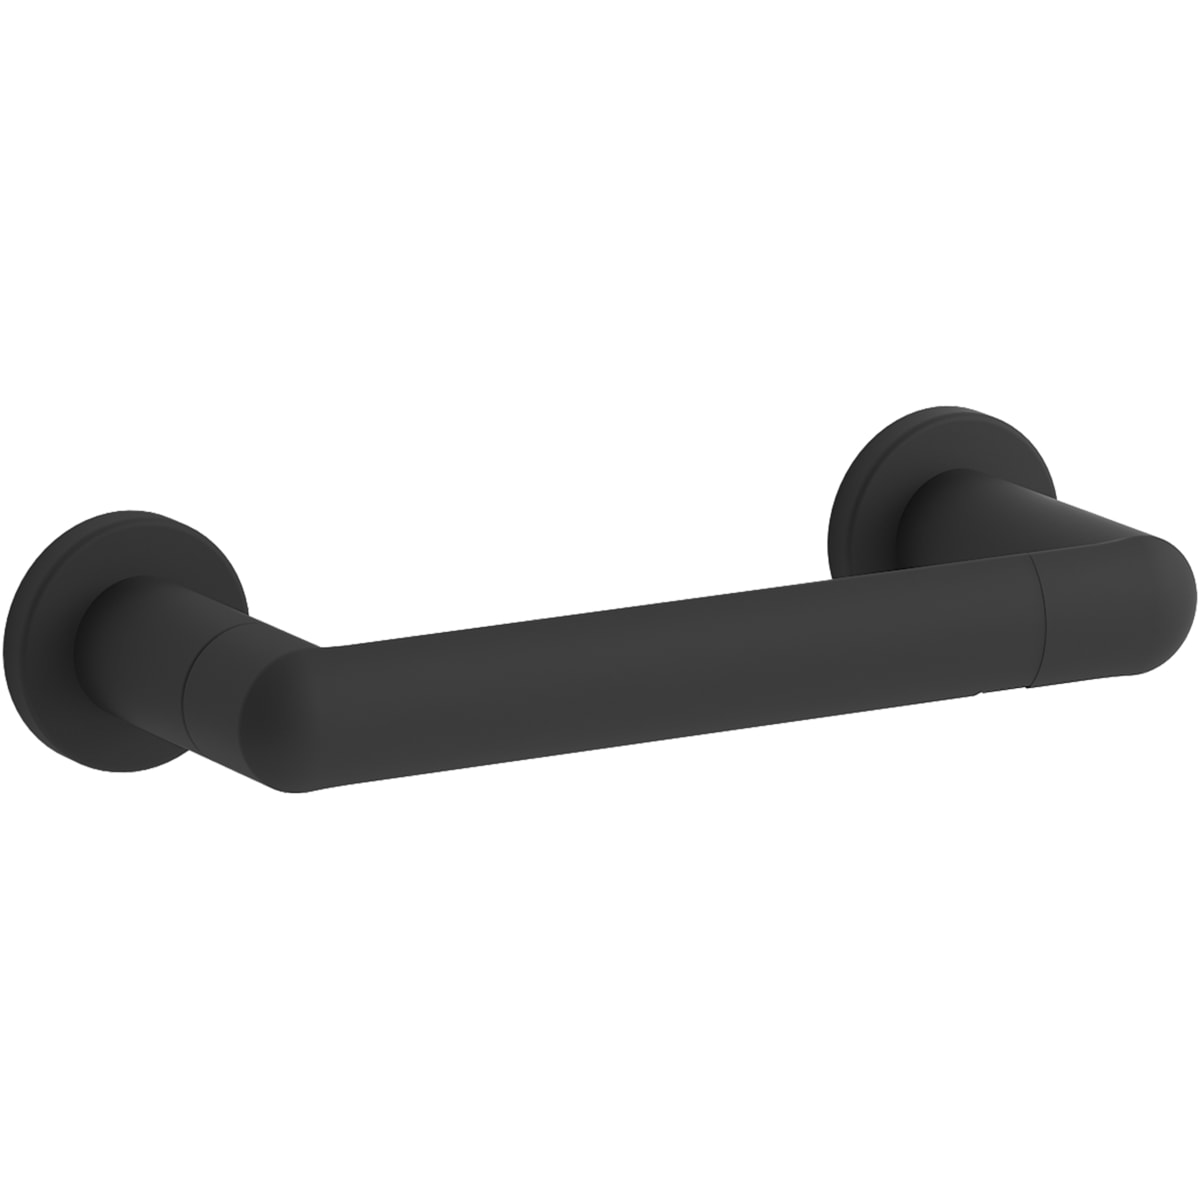 Delta Contemporary Tissue Holder with Assist Bar in Matte Black